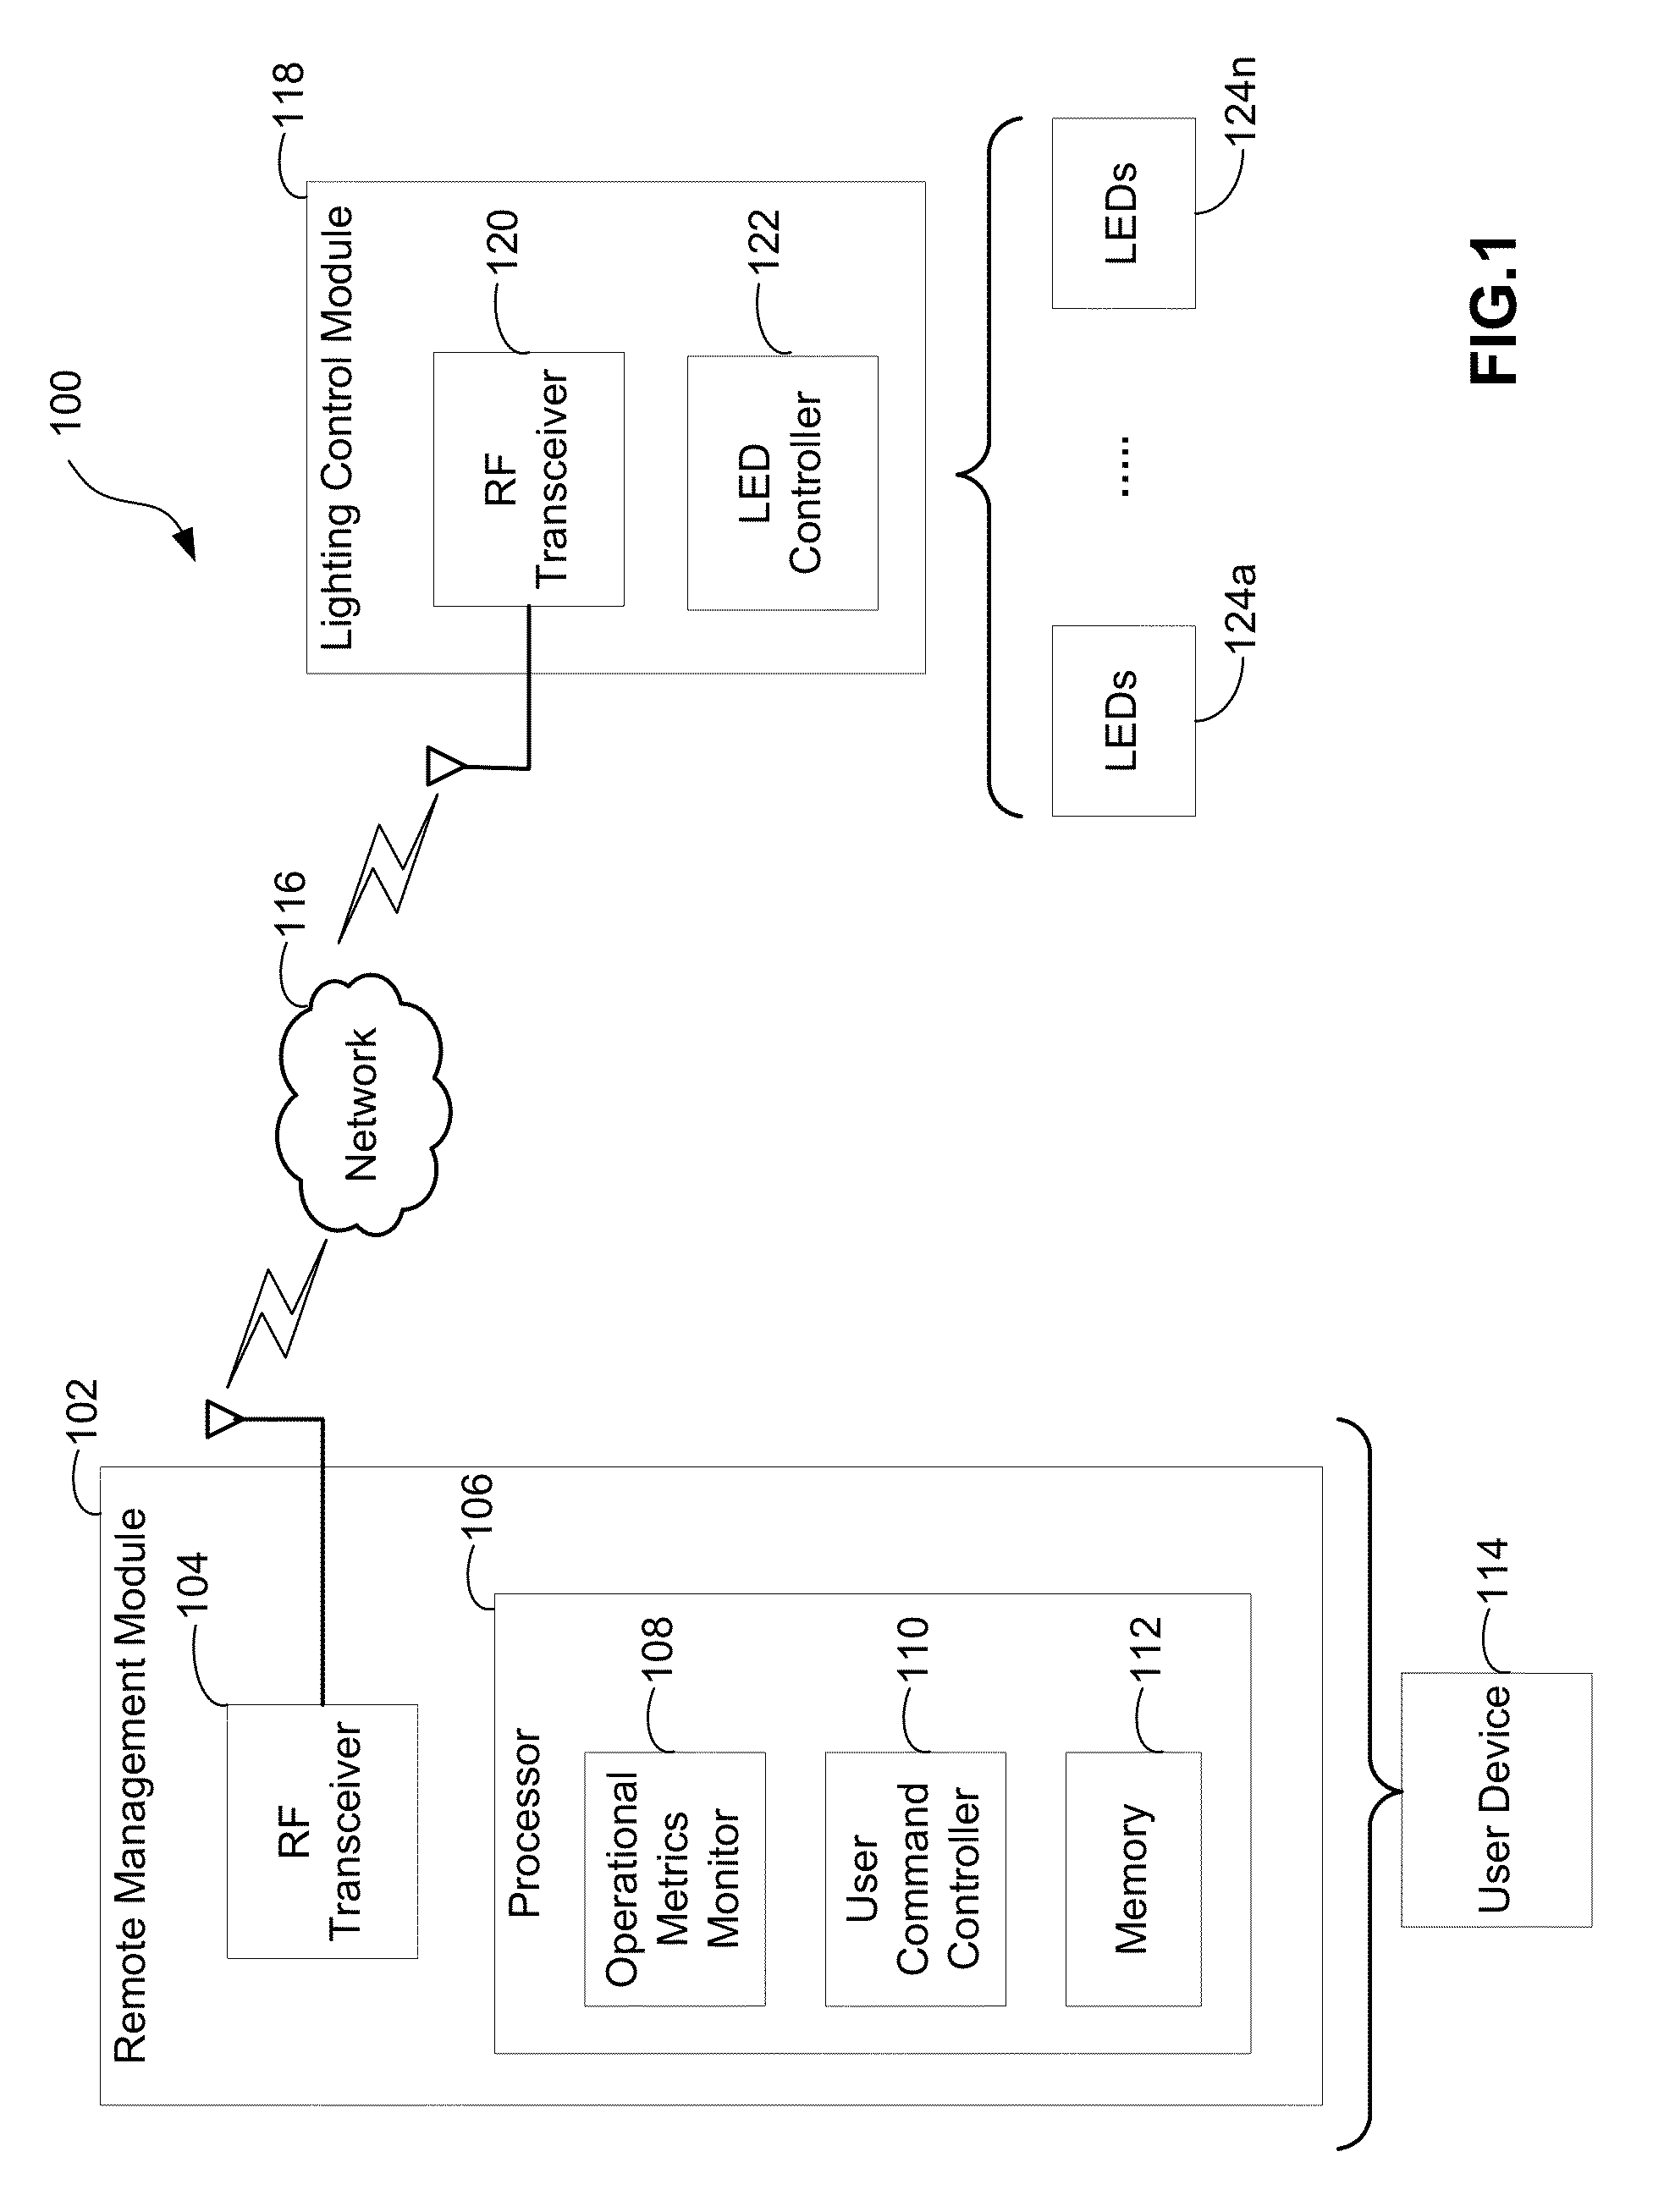 Lighting device monitor and communication apparatus